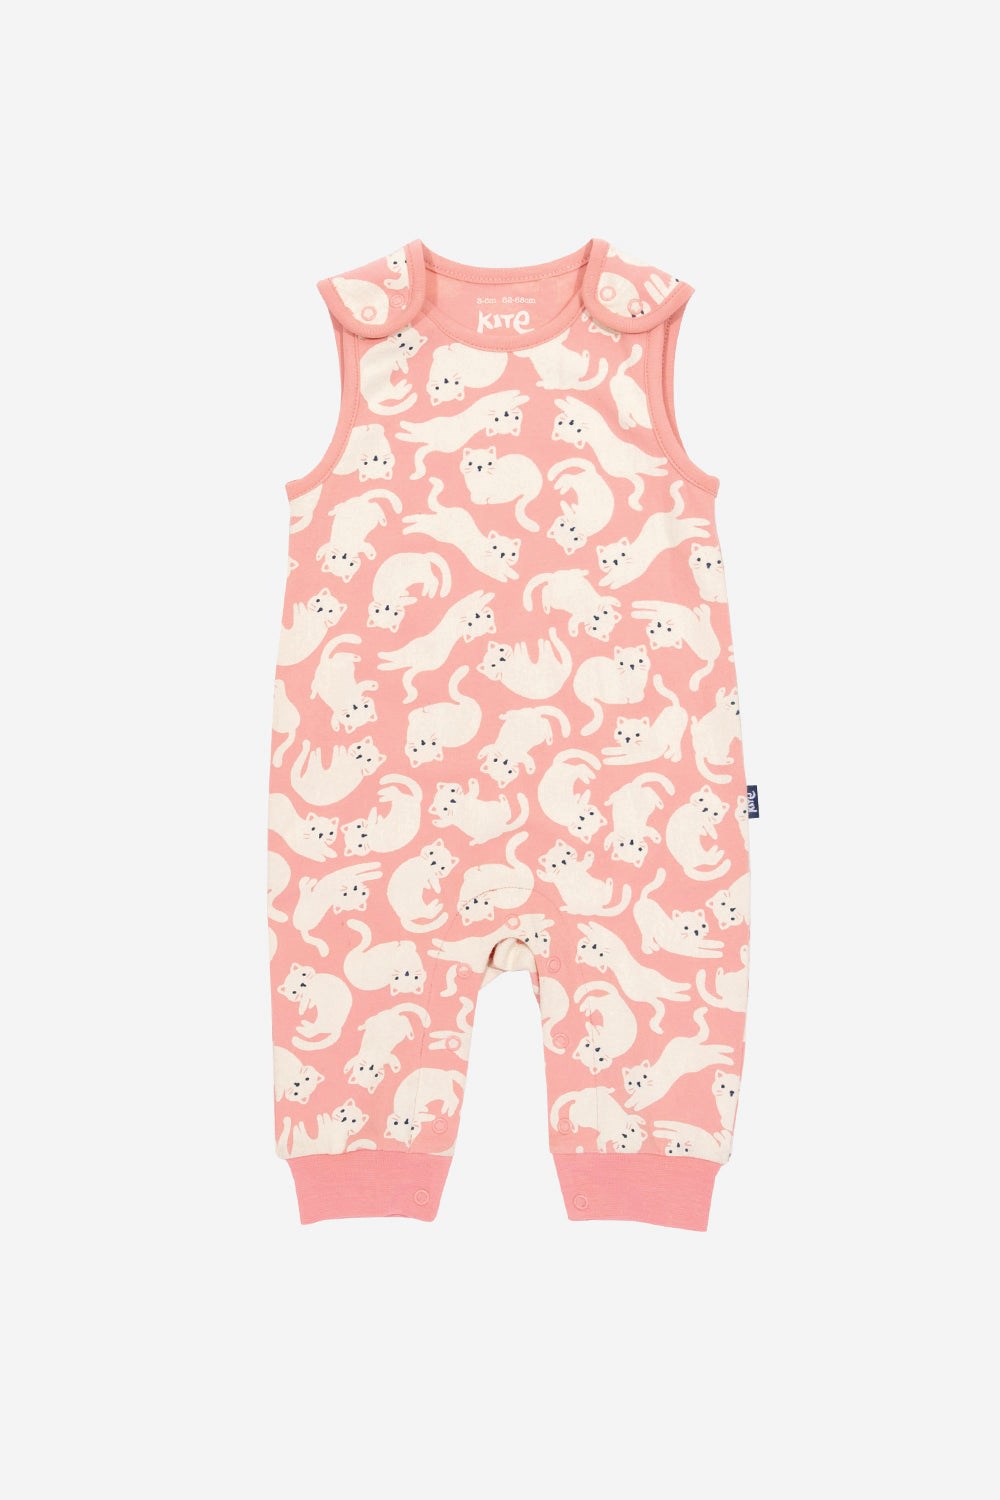 Kitty Cat Baby Dungarees -